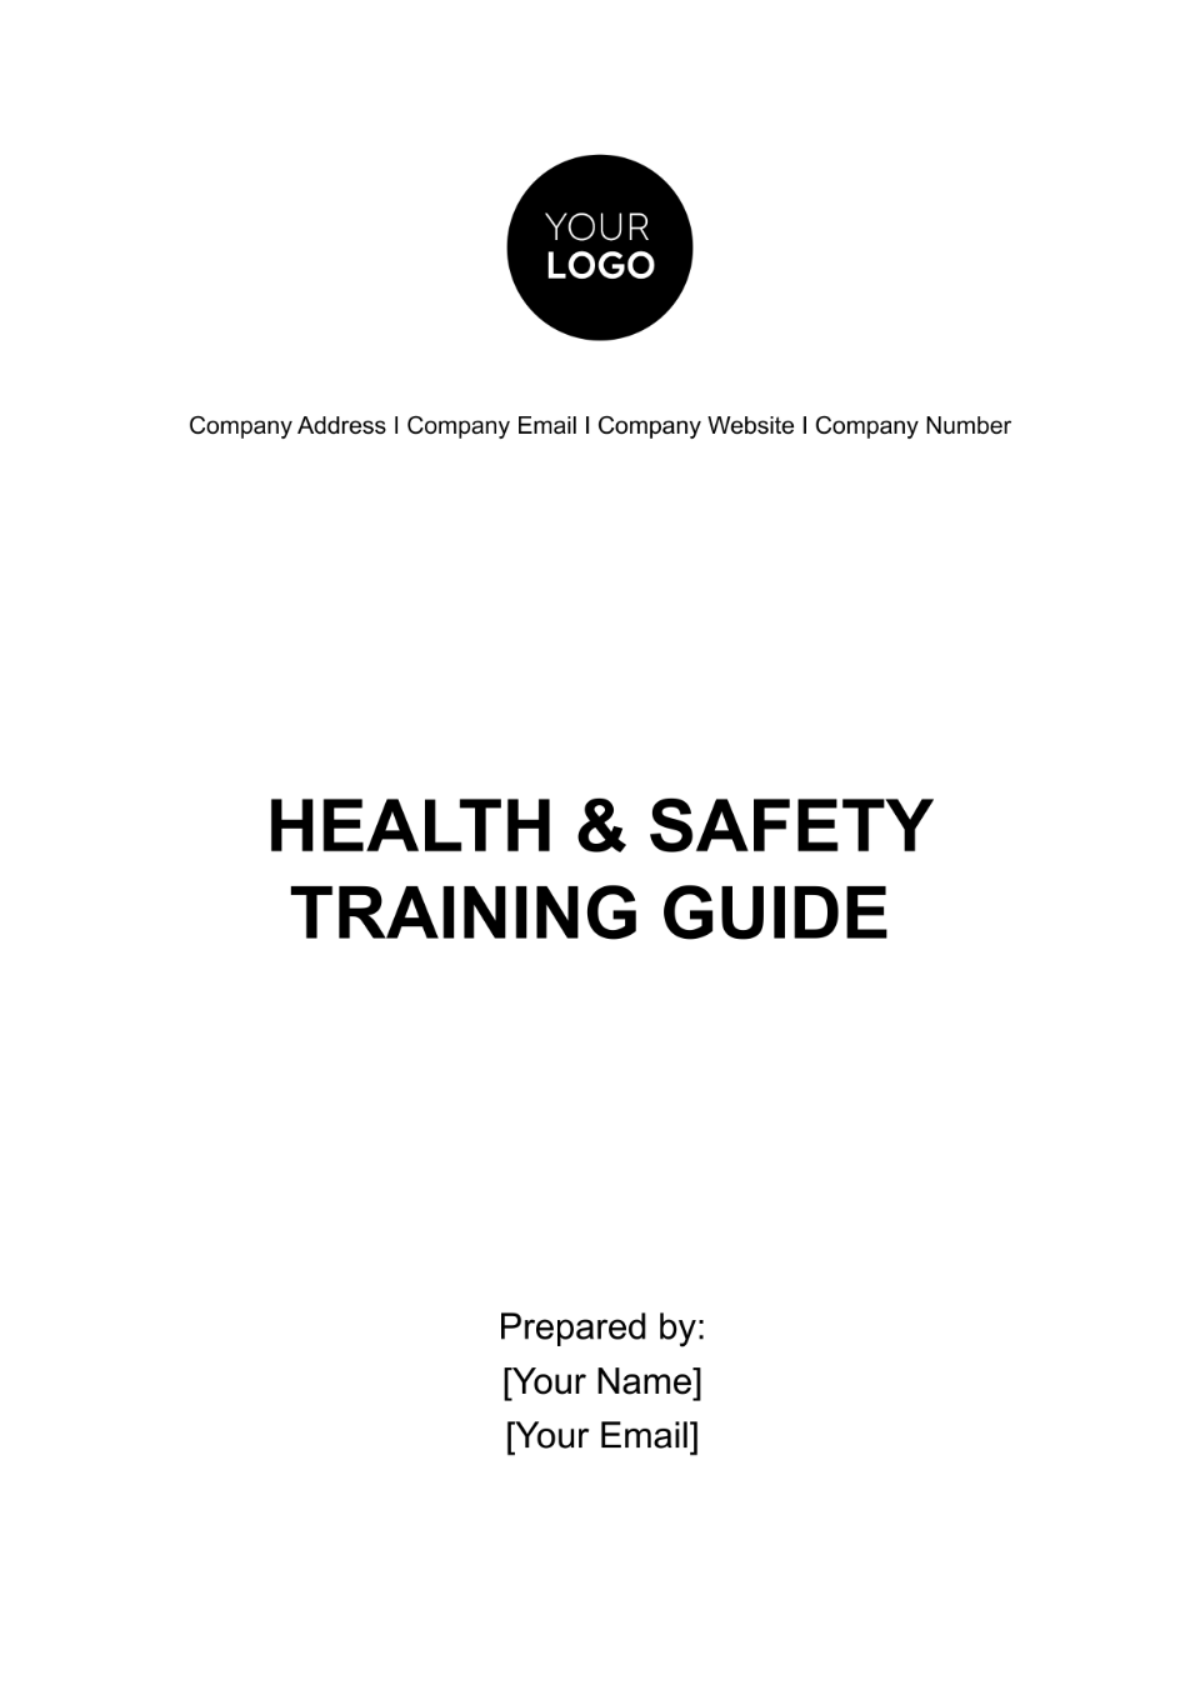 Free Health & Safety Training Guide Template